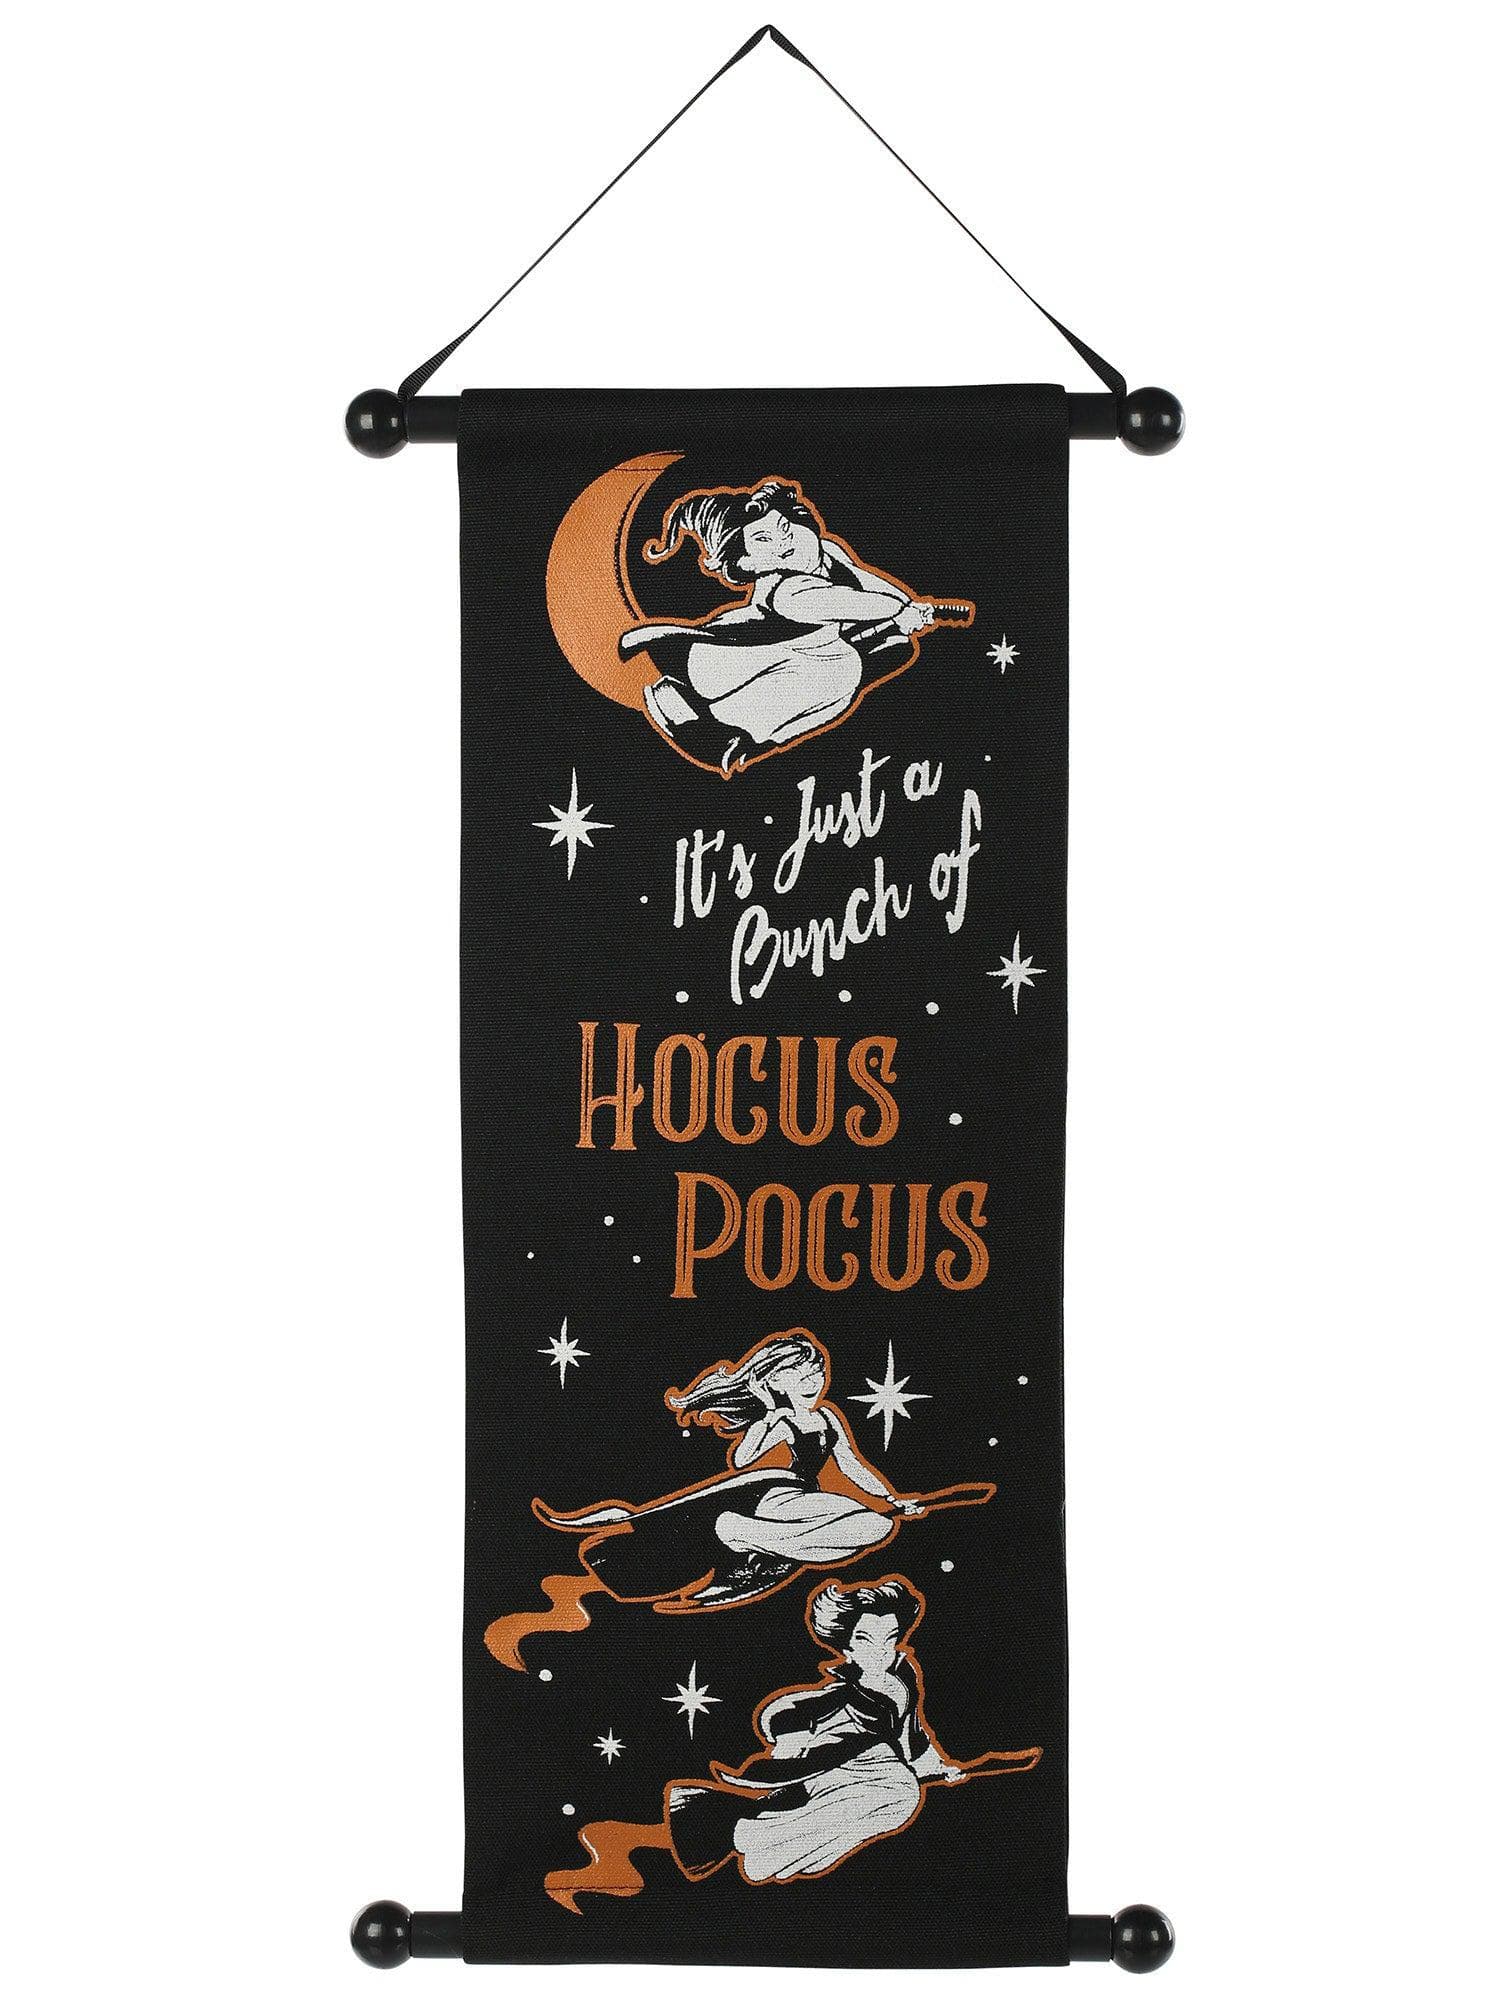 18 Inch Hocus Pocus Hanging Wall Banner - costumes.com